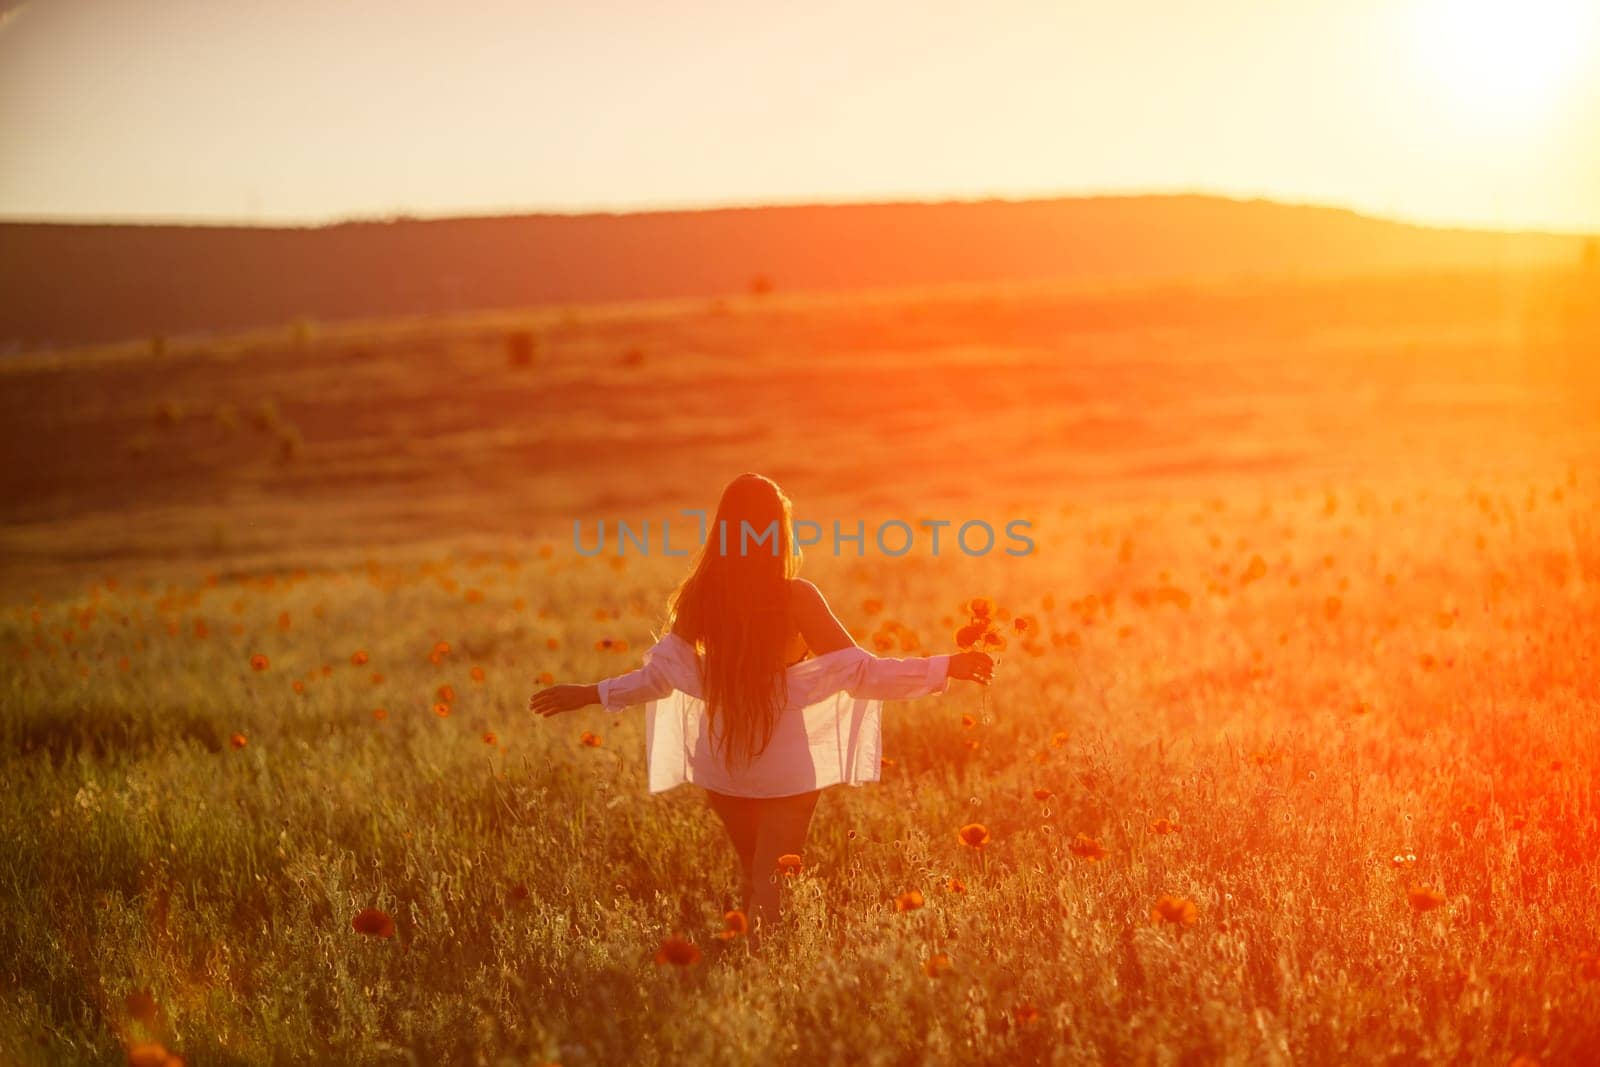 A woman is standing in a field of flowers, with the sun shining brightly on her. Concept of peace and tranquility, as the woman is enjoying the beauty of nature